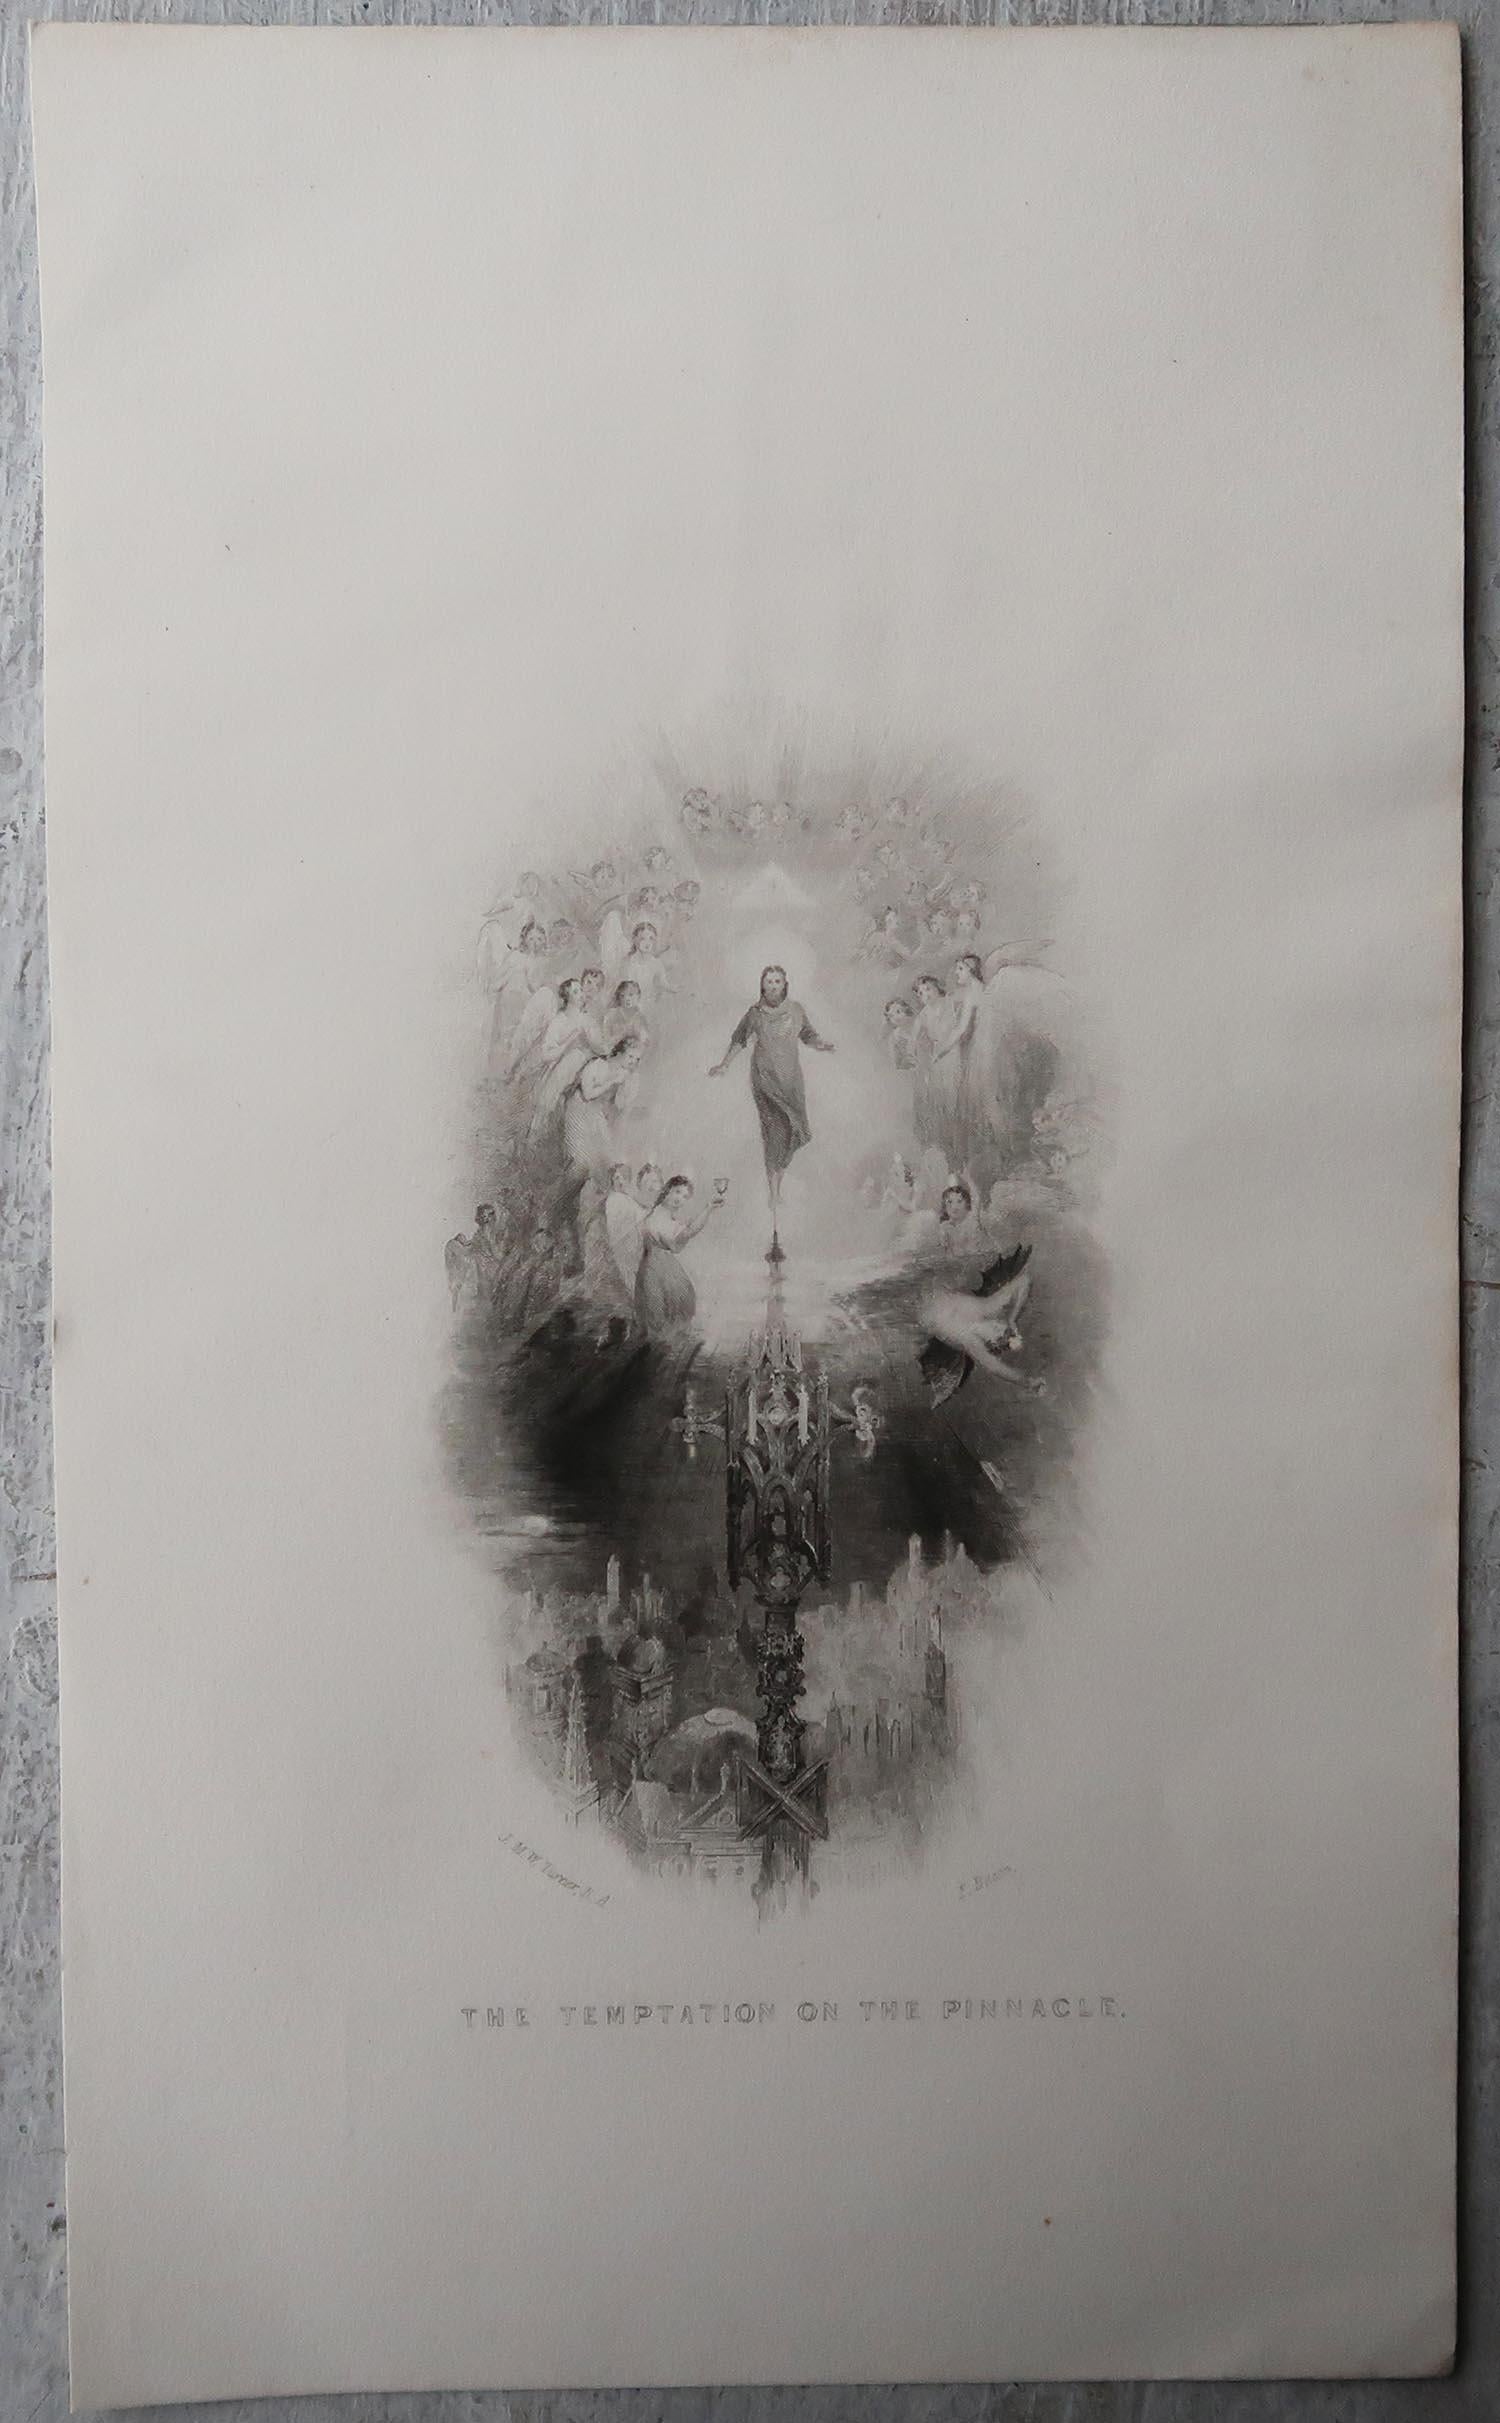 Romantic Antique Print After J.M.W Turner, the Temptation on the Pinnacle, 1835 For Sale